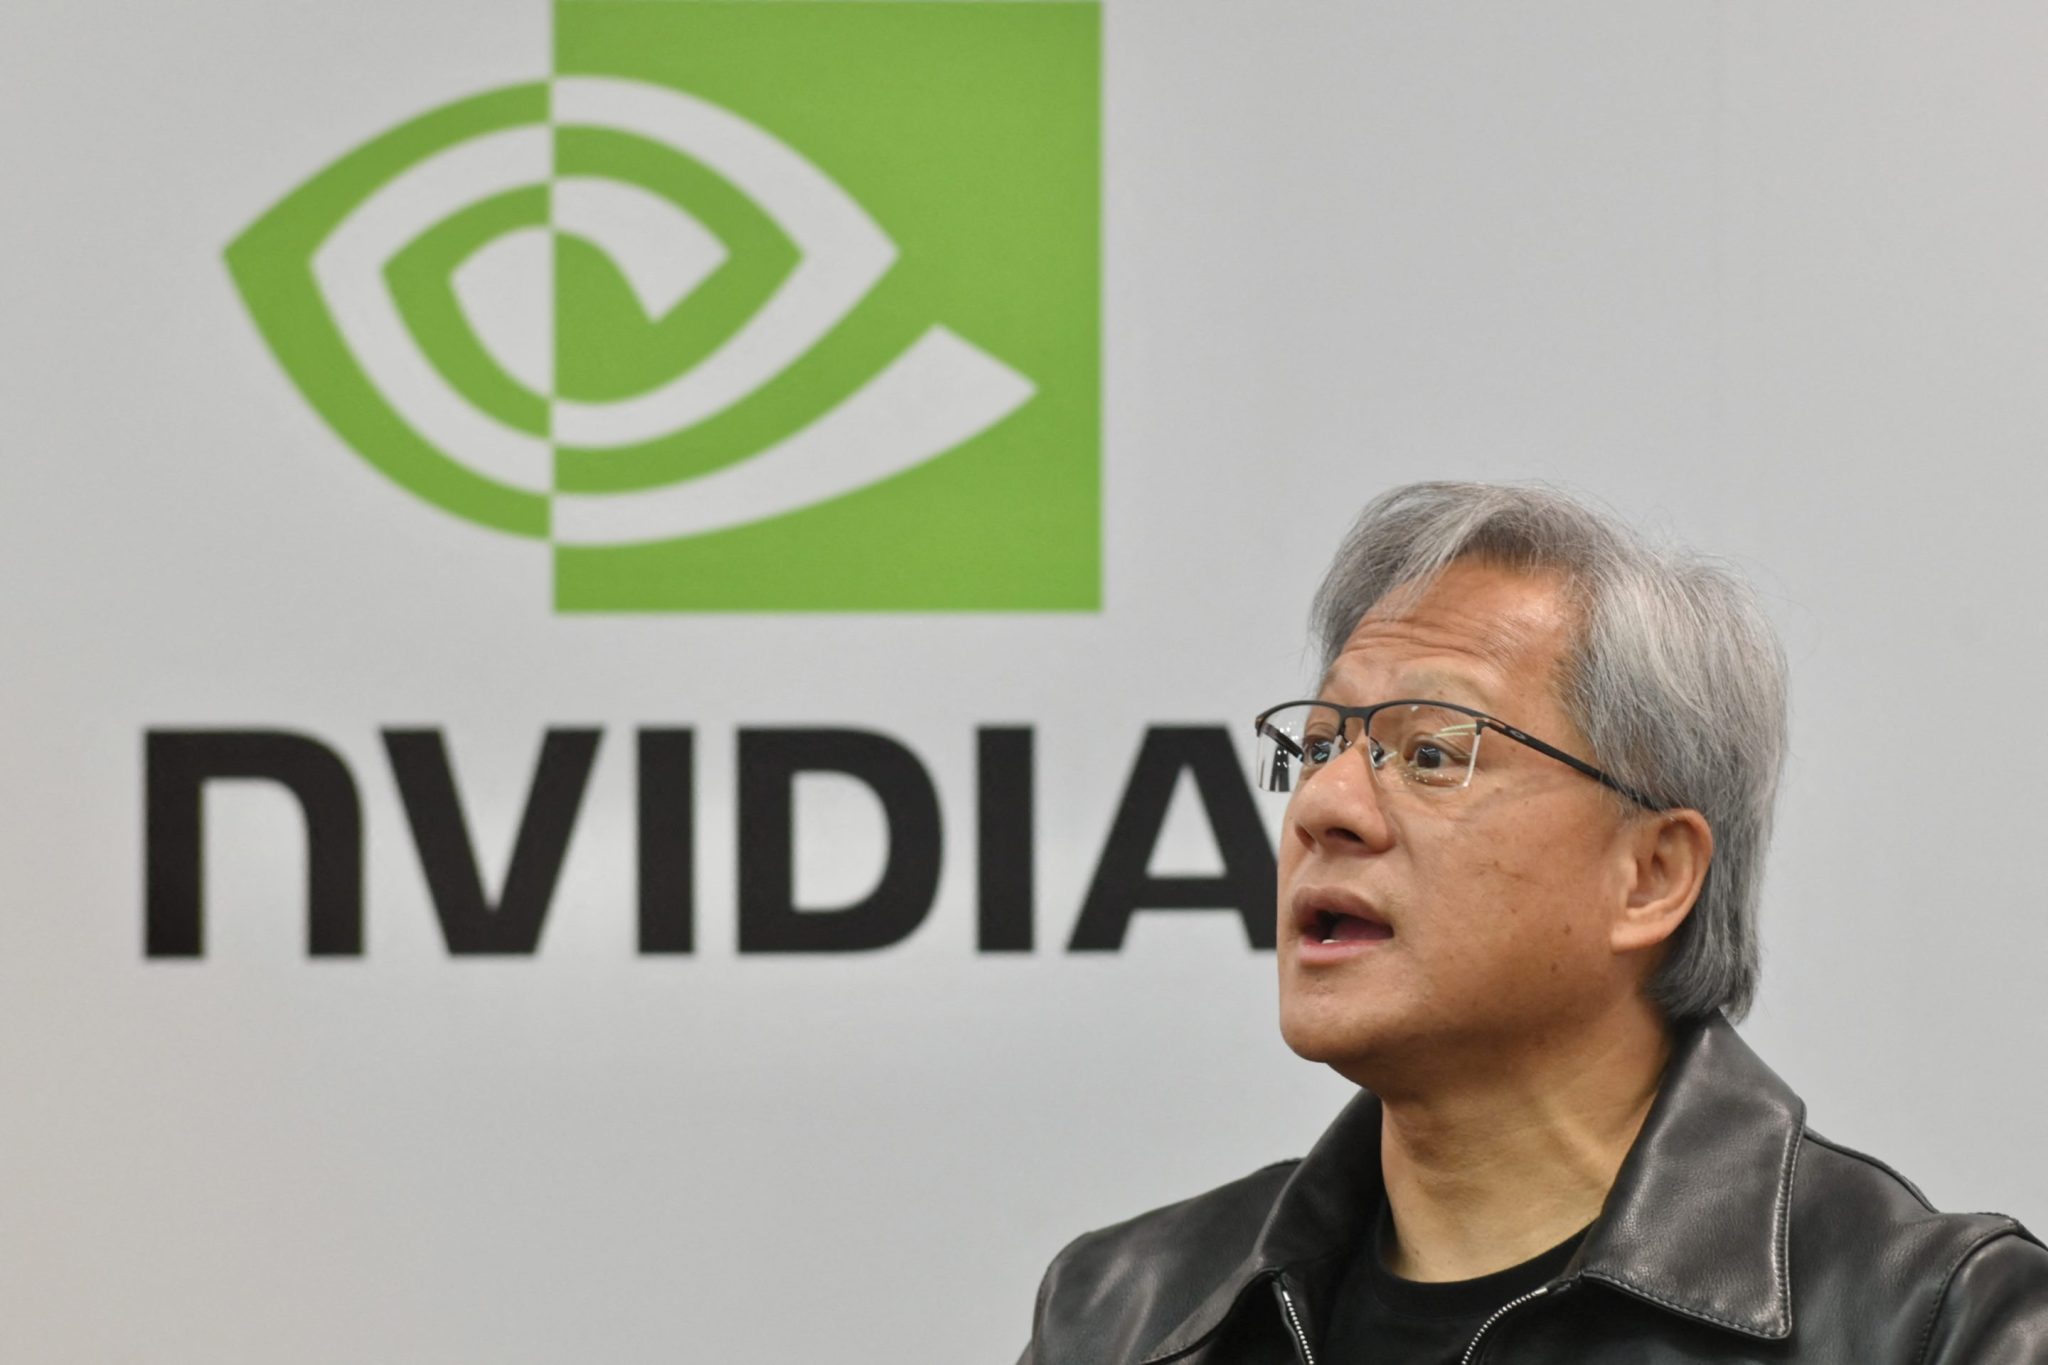 Nvidia: Why ‘Britain’s Warren Buffett’ and market sage Rob Arnott are skeptical